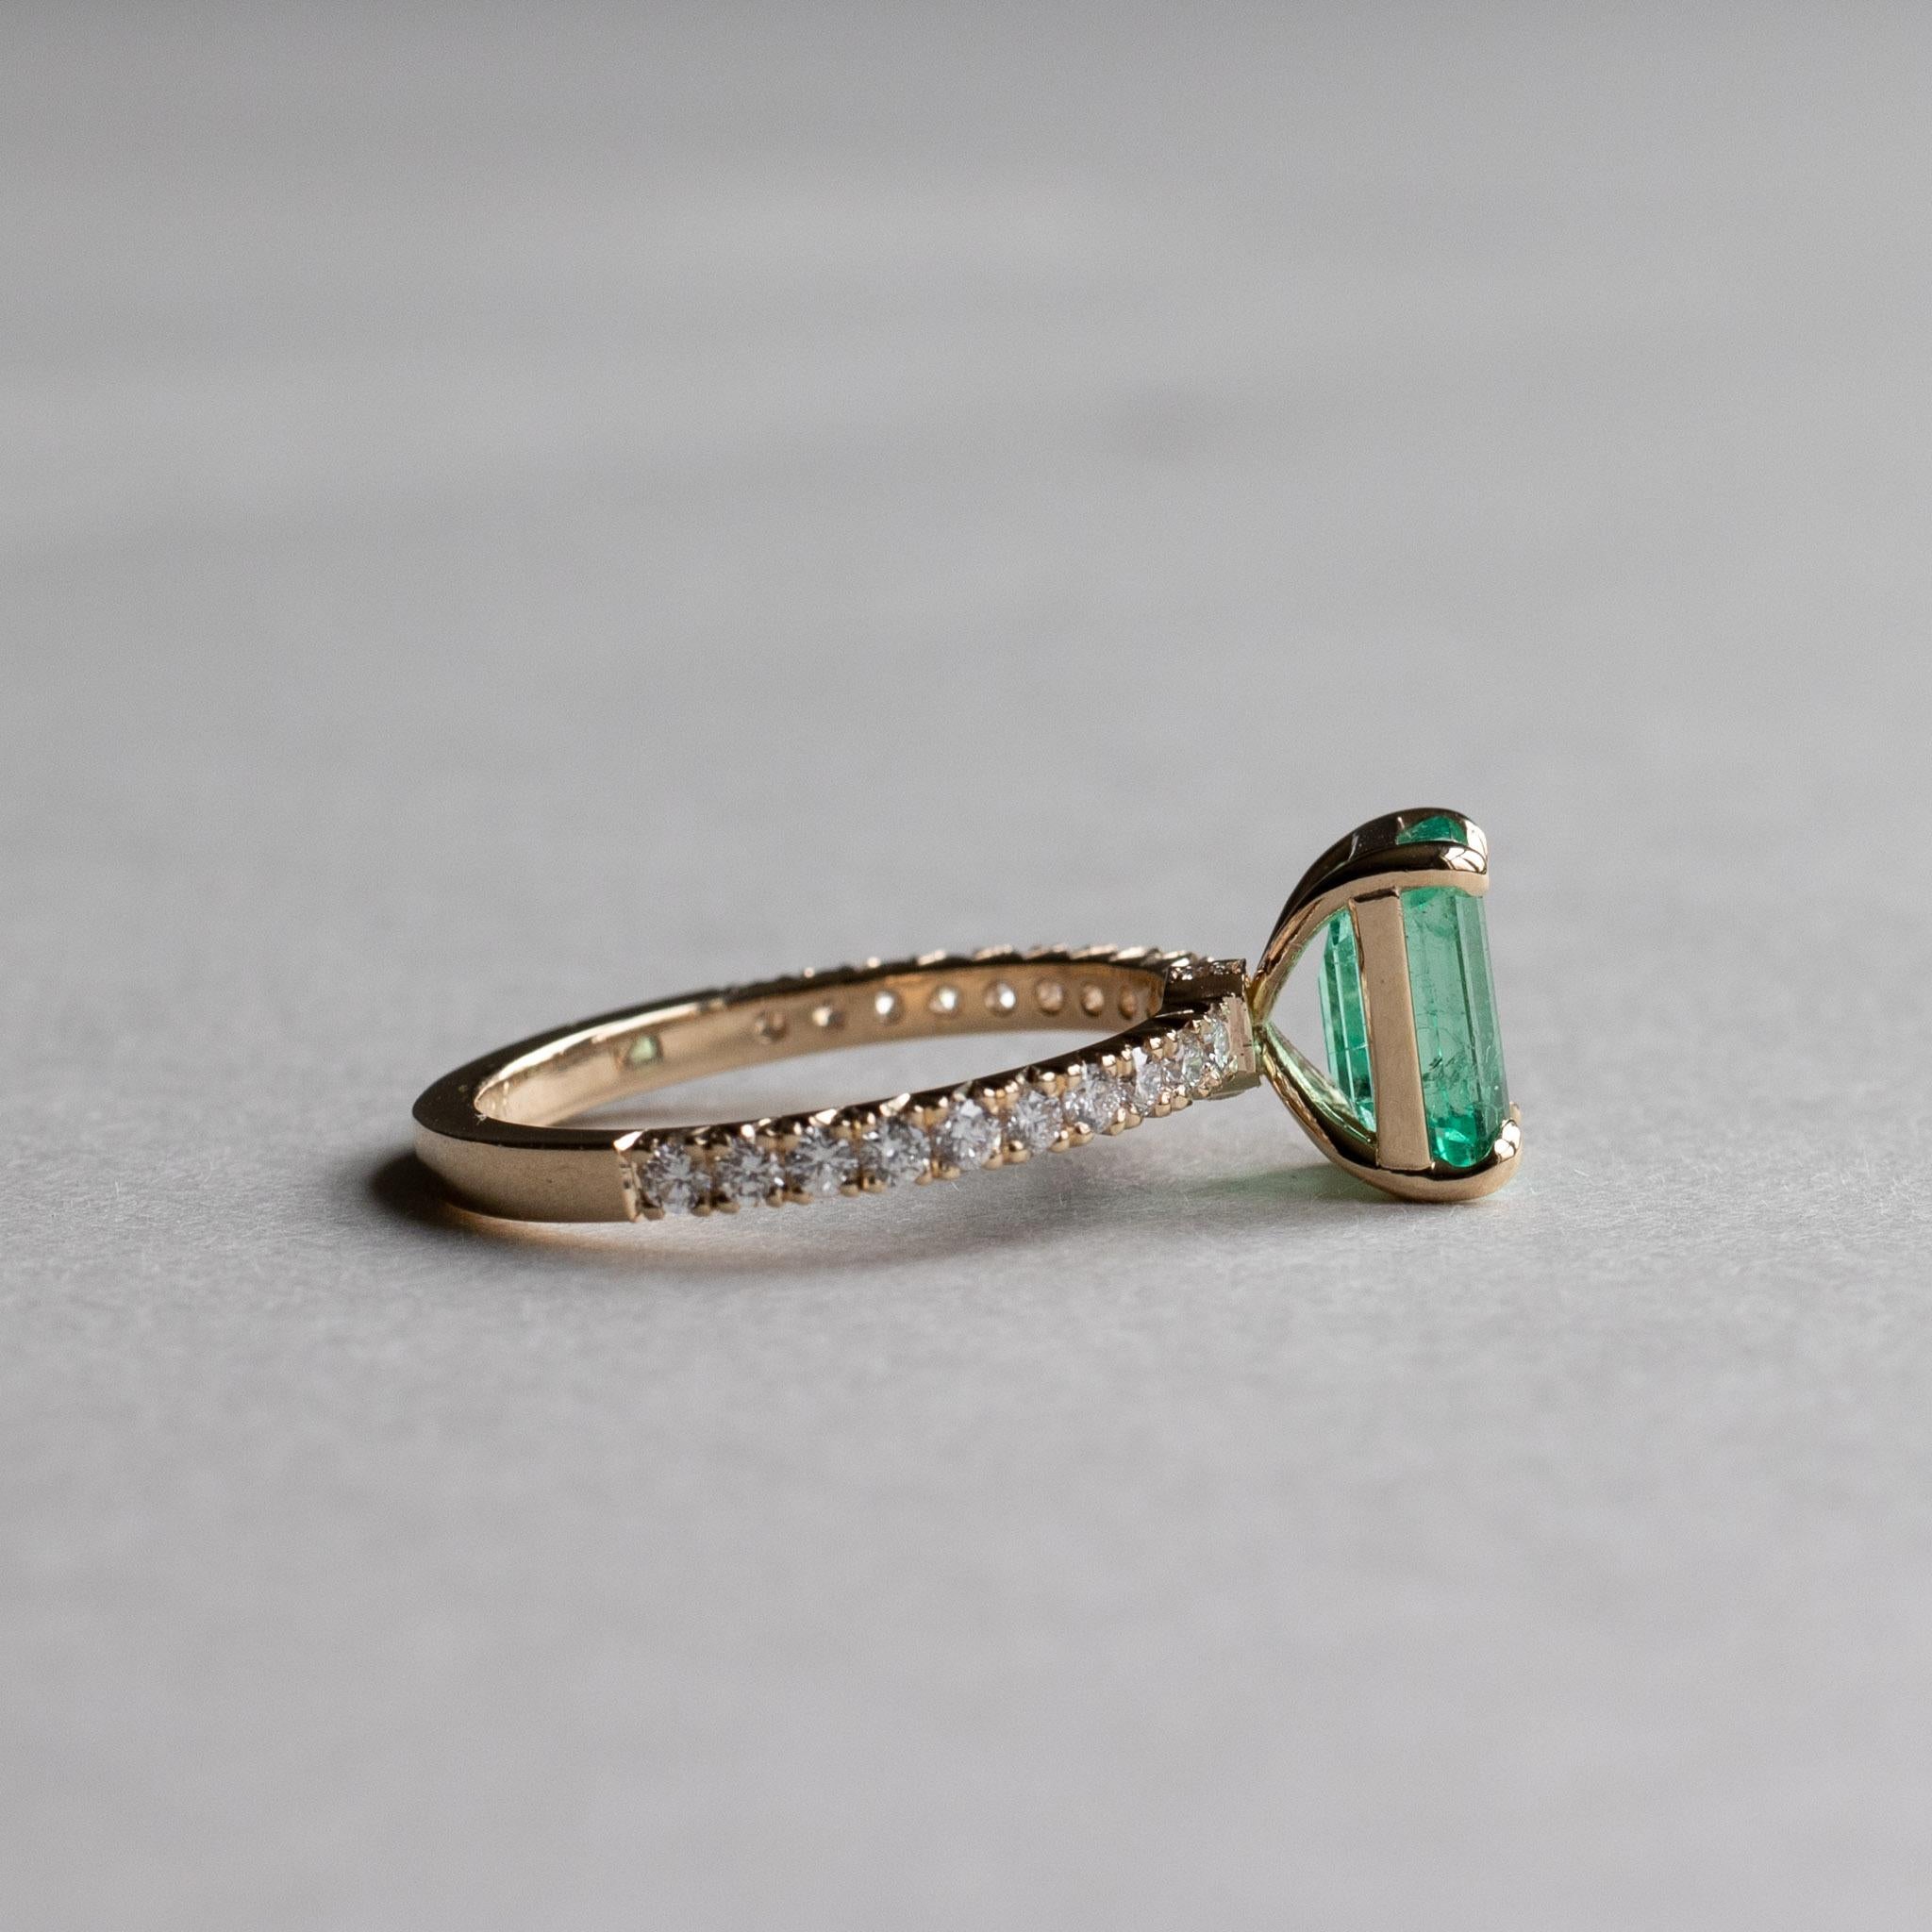 Metal: 18k yellow gold
Stone: Natural emerald 
Stone size: 2 carat
Accent Stone: Diamond
Accent stone weight: 0.40 carat 
Shank: 2 x 1.6mm